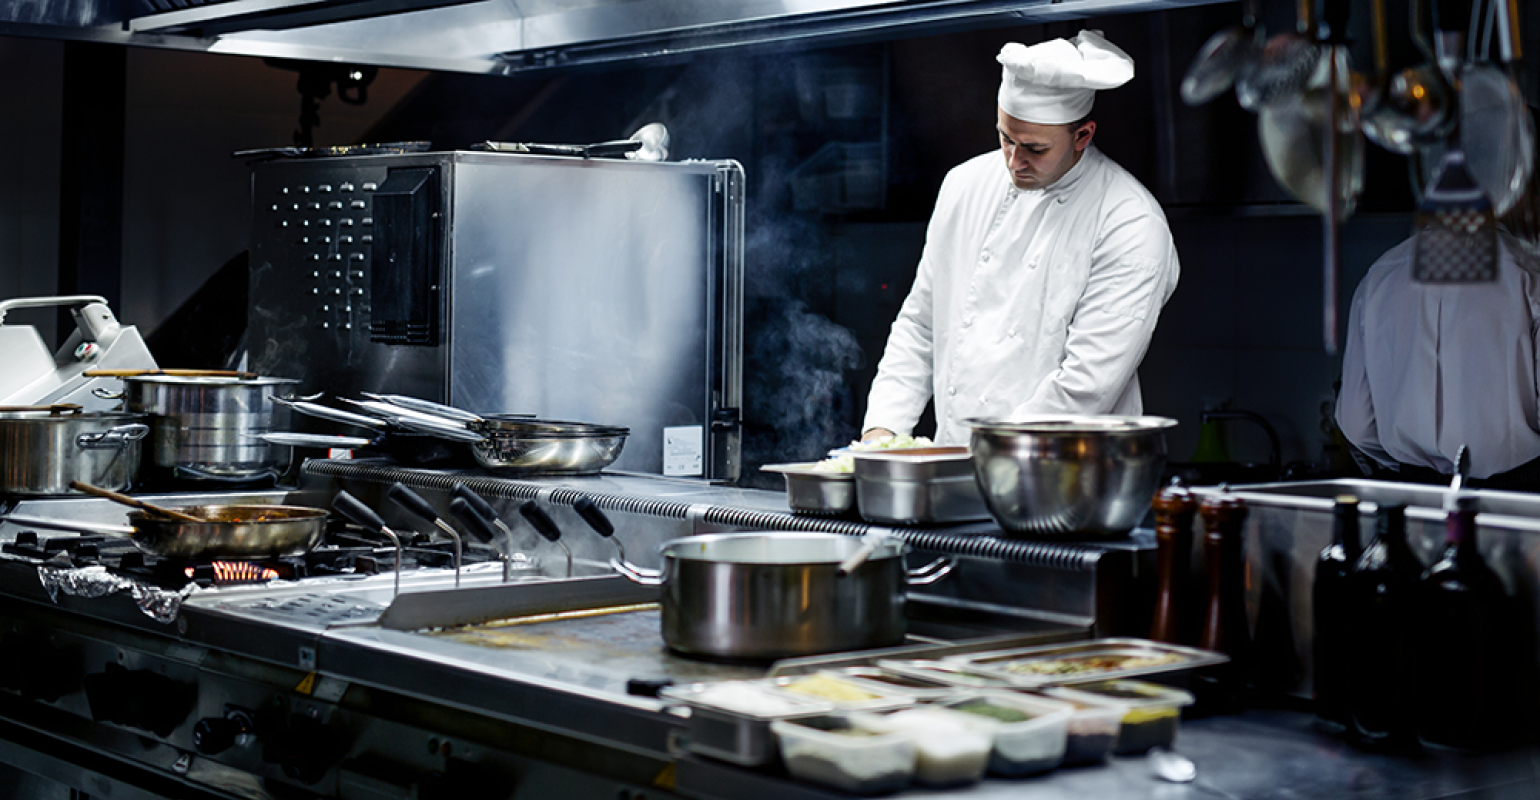 The gap between bosses and workers in restaurant kitchens is widening